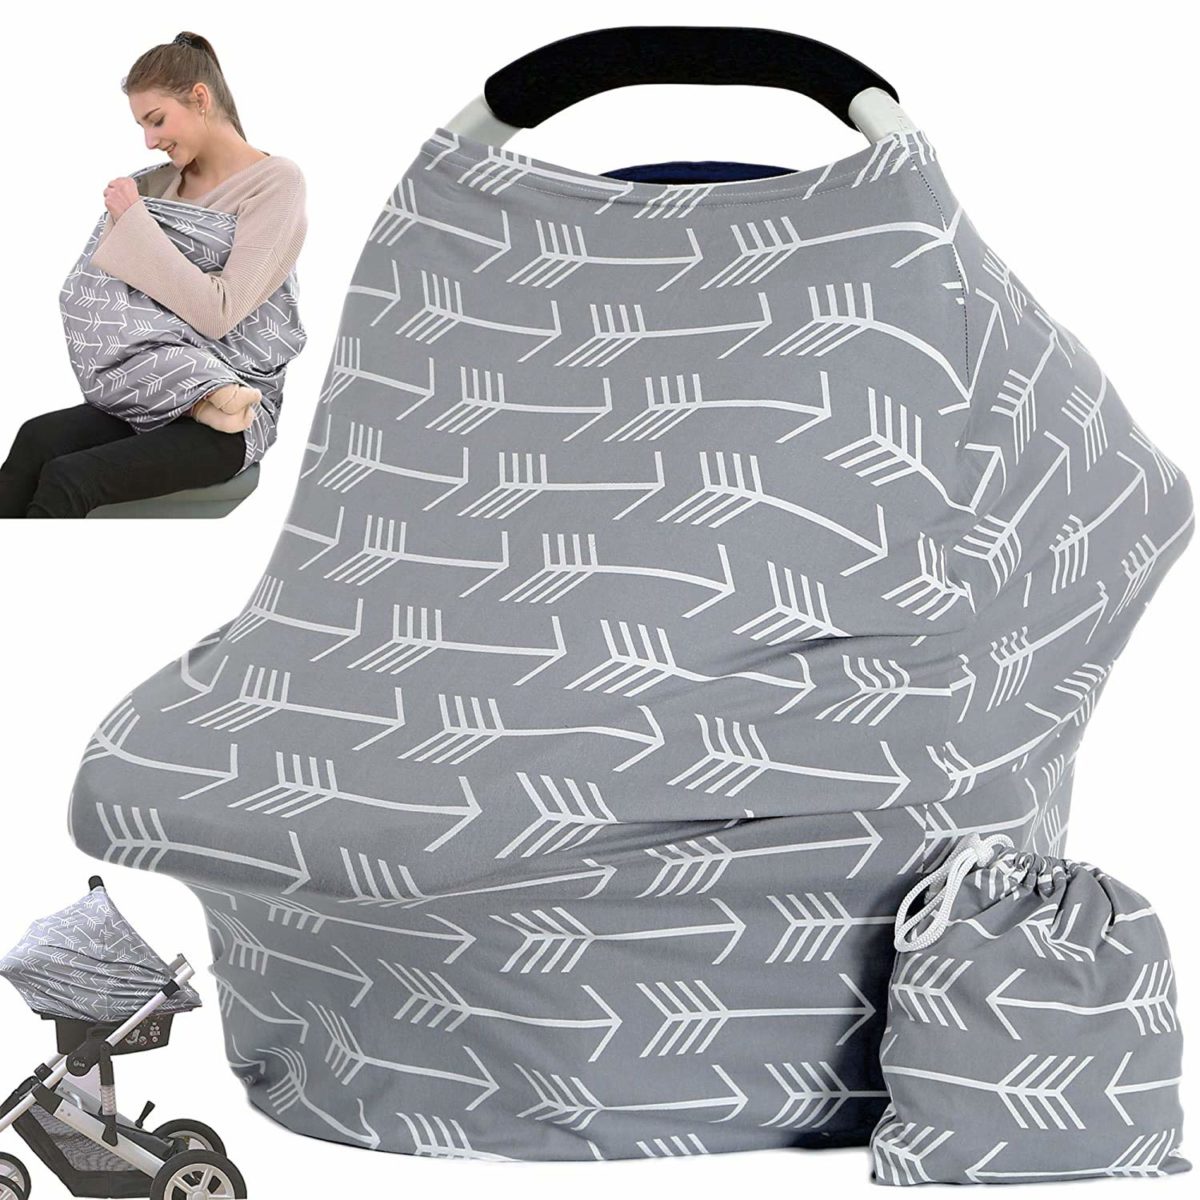 43 of the best products for moms and babies that will help you feel prepared | this list has the best of the best when it comes to baby gear and mommy gear.